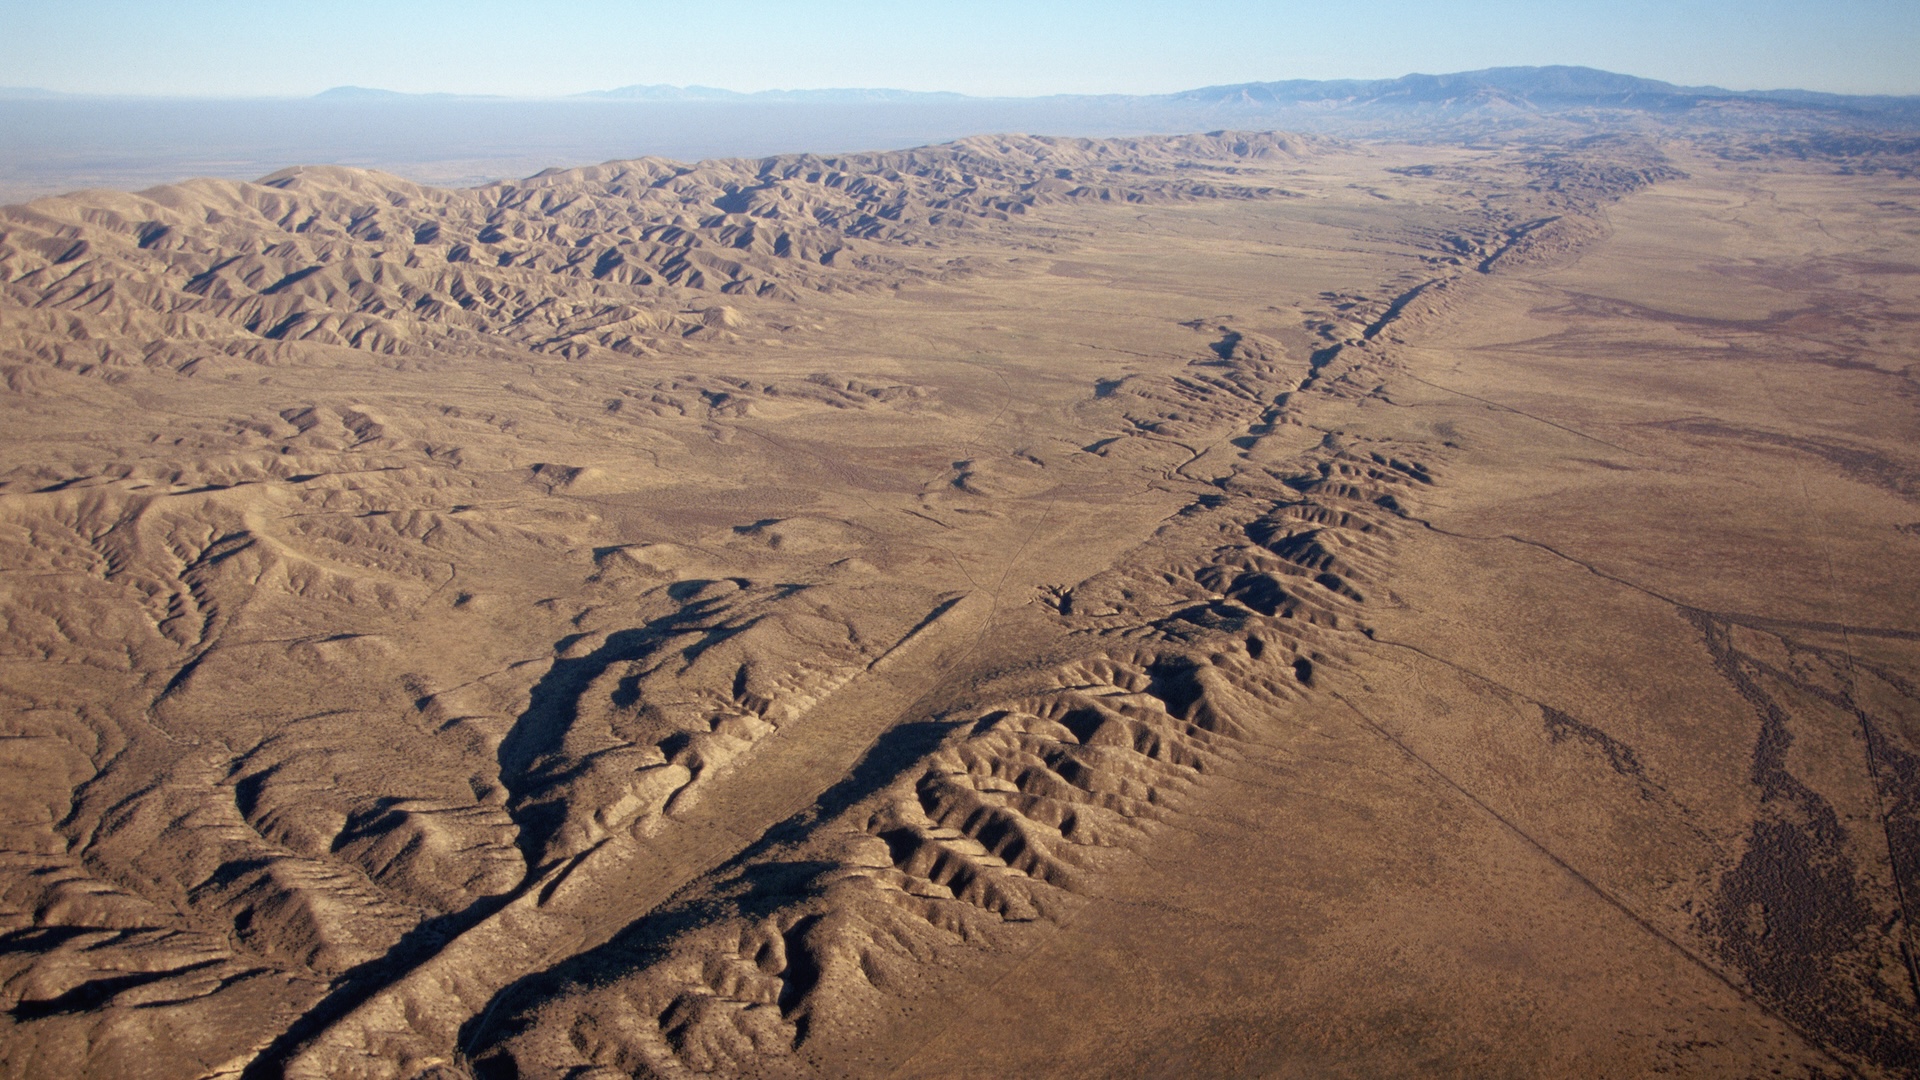 An aerial photo of the San Andreas fault